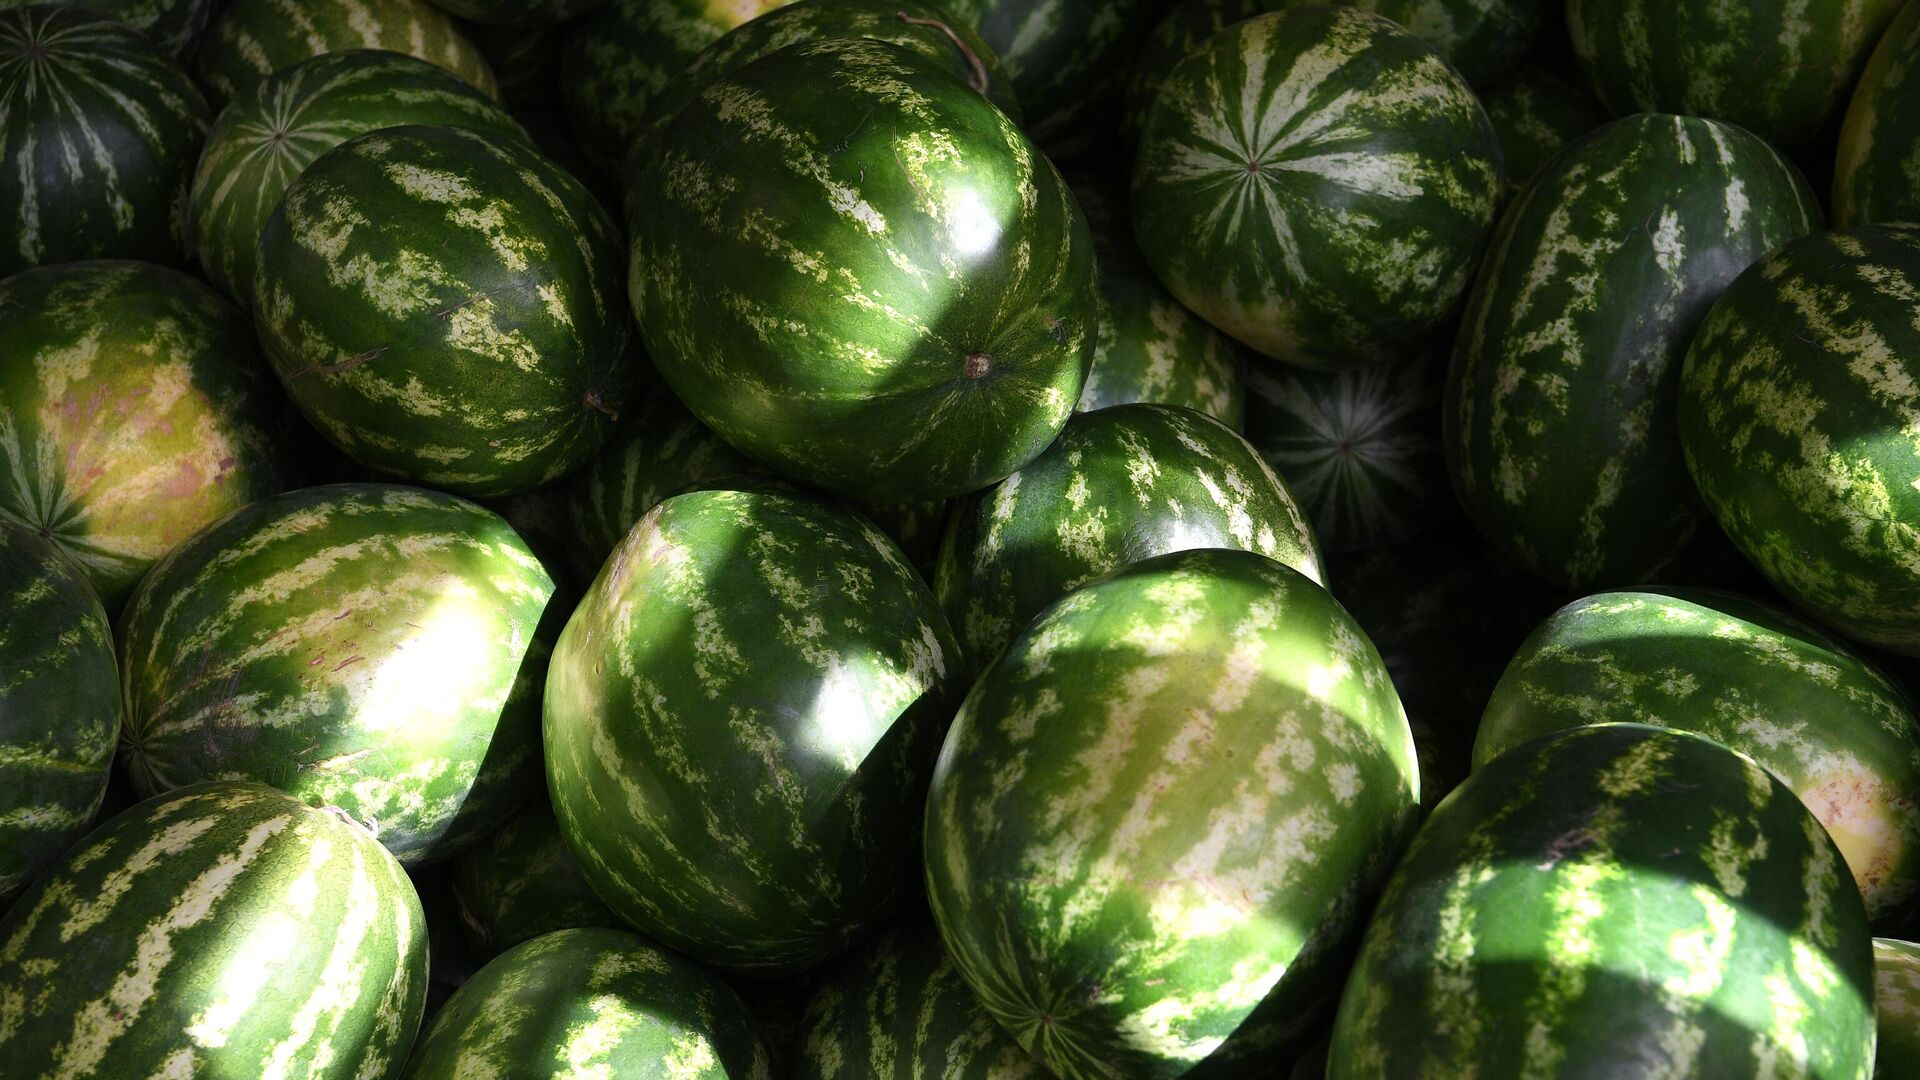 Watermelons in the trade pavilion - 1920, 02.11.2021